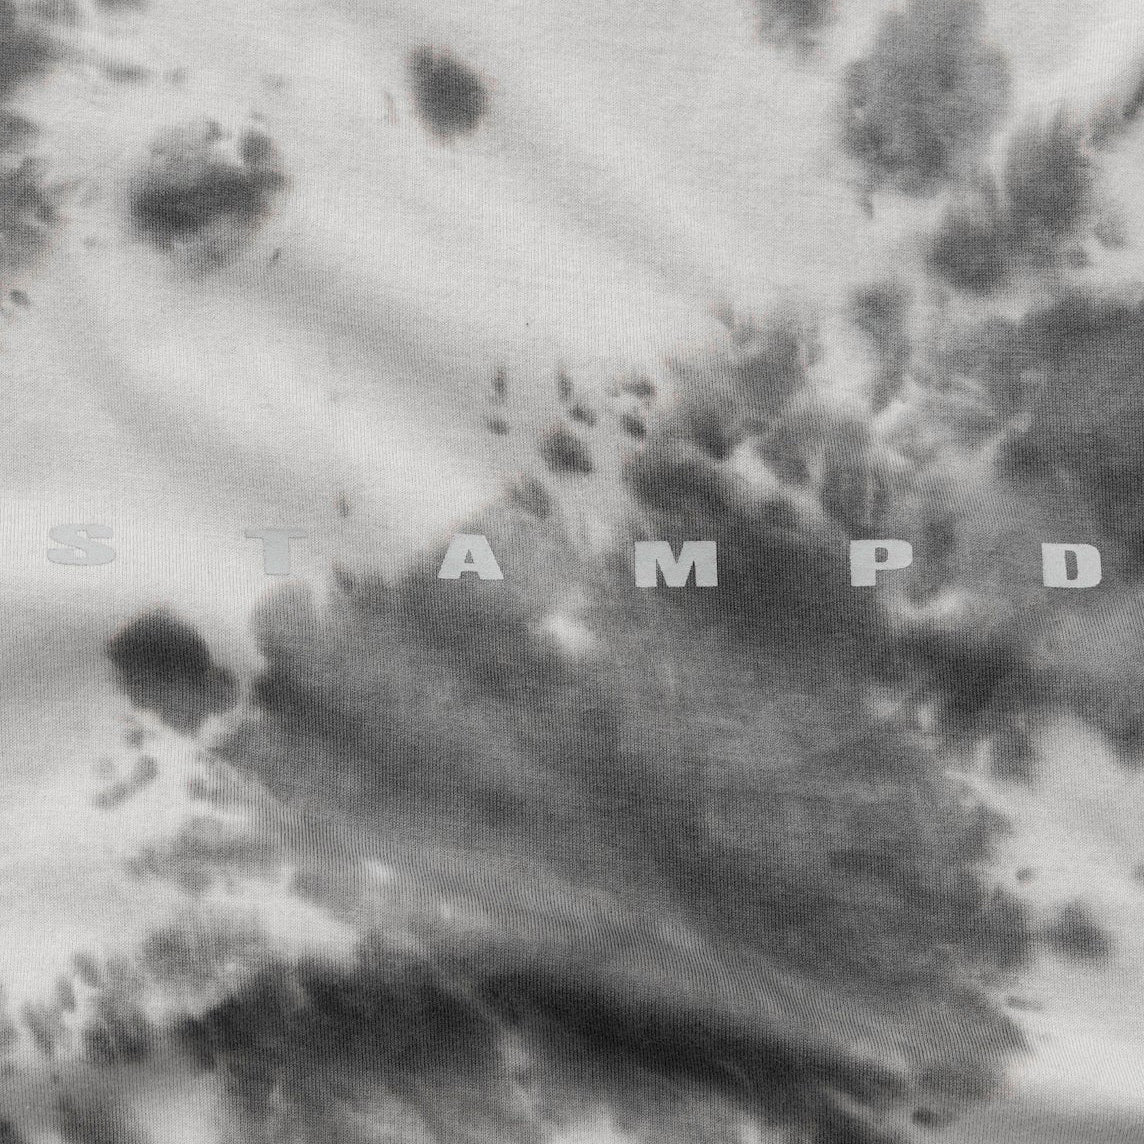 STAMPD Tie-Dye Relaxed Tee Grey